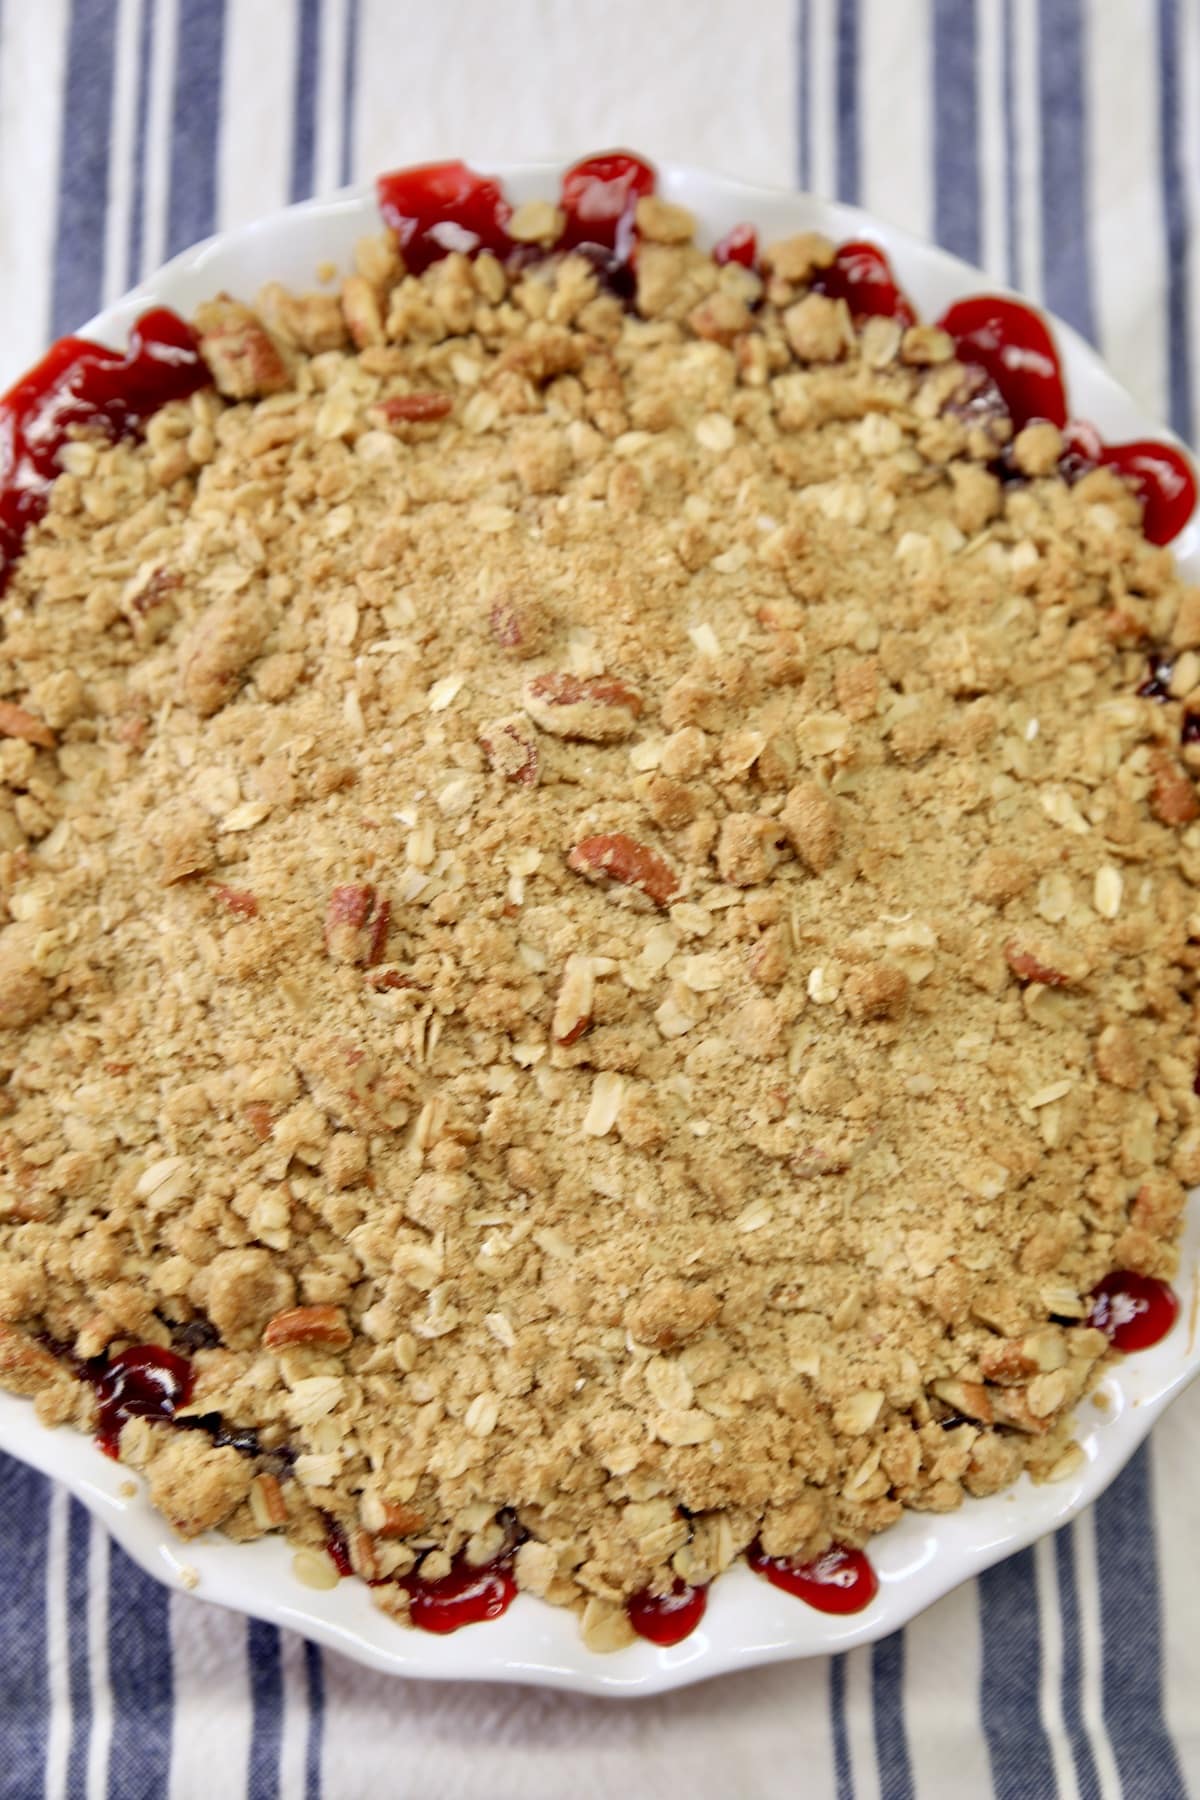 Baked cherry crisp in a pie plate on a striped cloth.